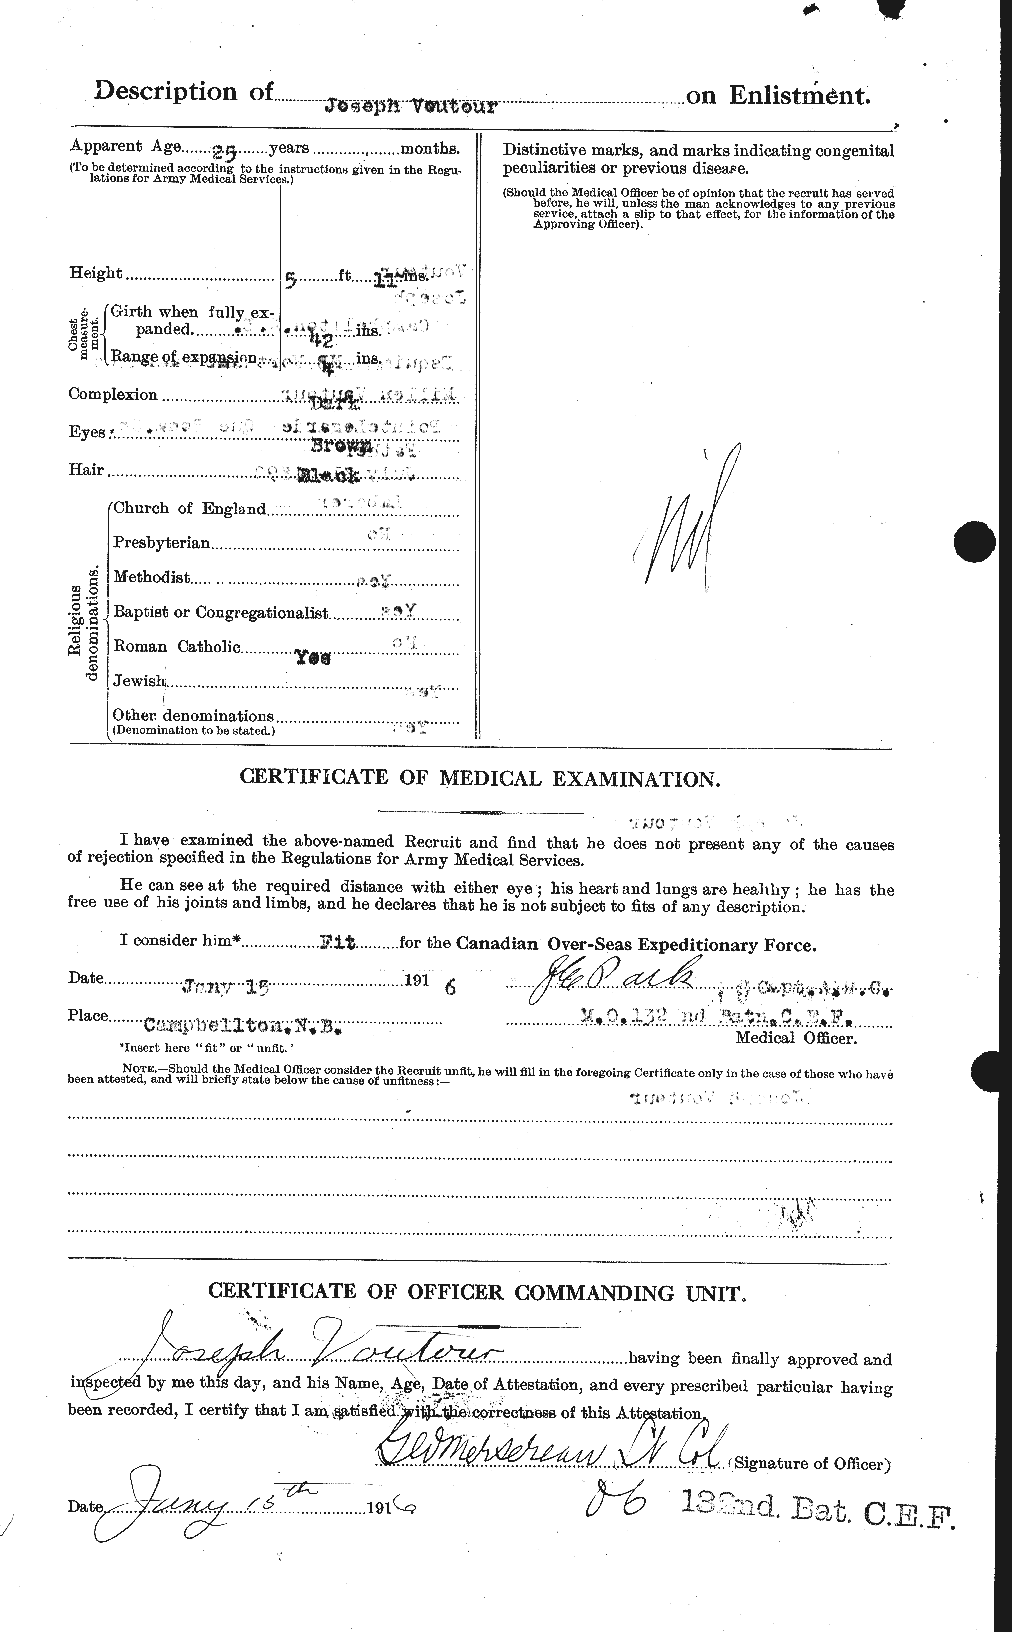 Personnel Records of the First World War - CEF 652449b